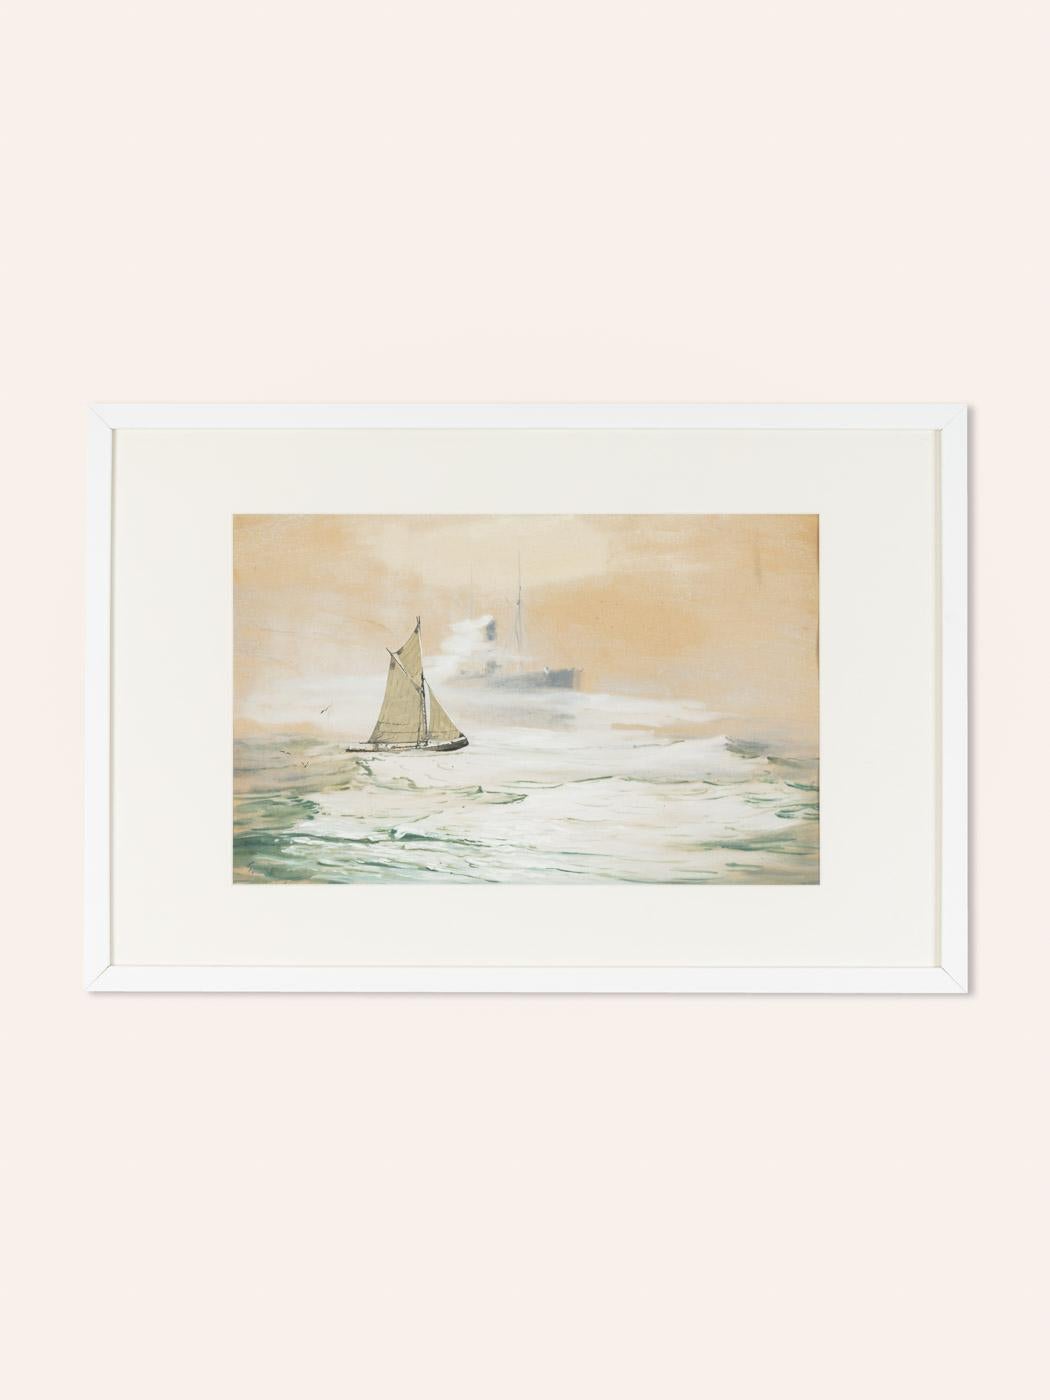 Painted On the high Seas Gouache on Paper Framed Georg Romin Sailing Boat Romantic For Sale